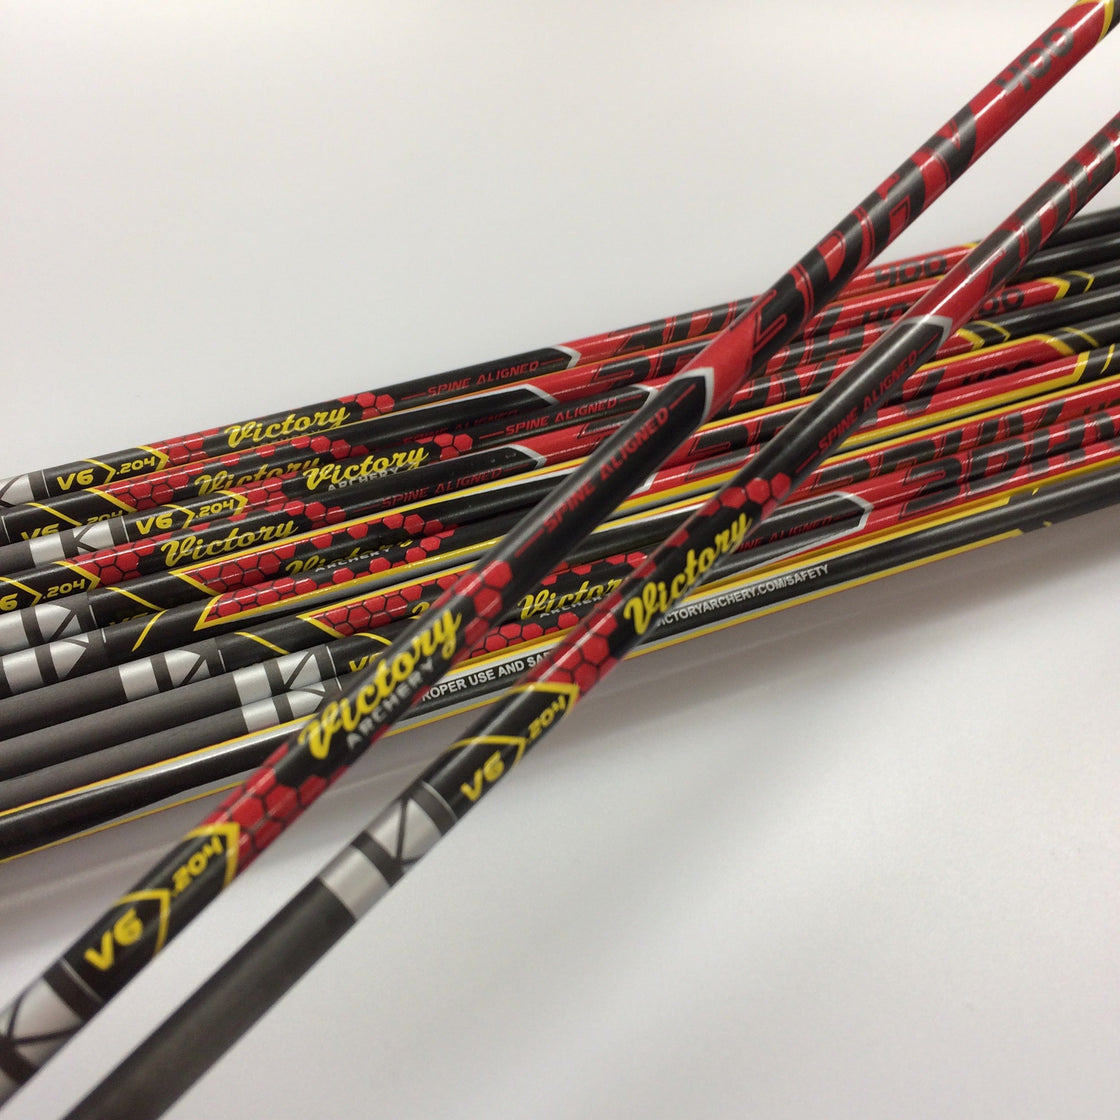 Victory 3DHV V6 Feathered - Custom Fletched